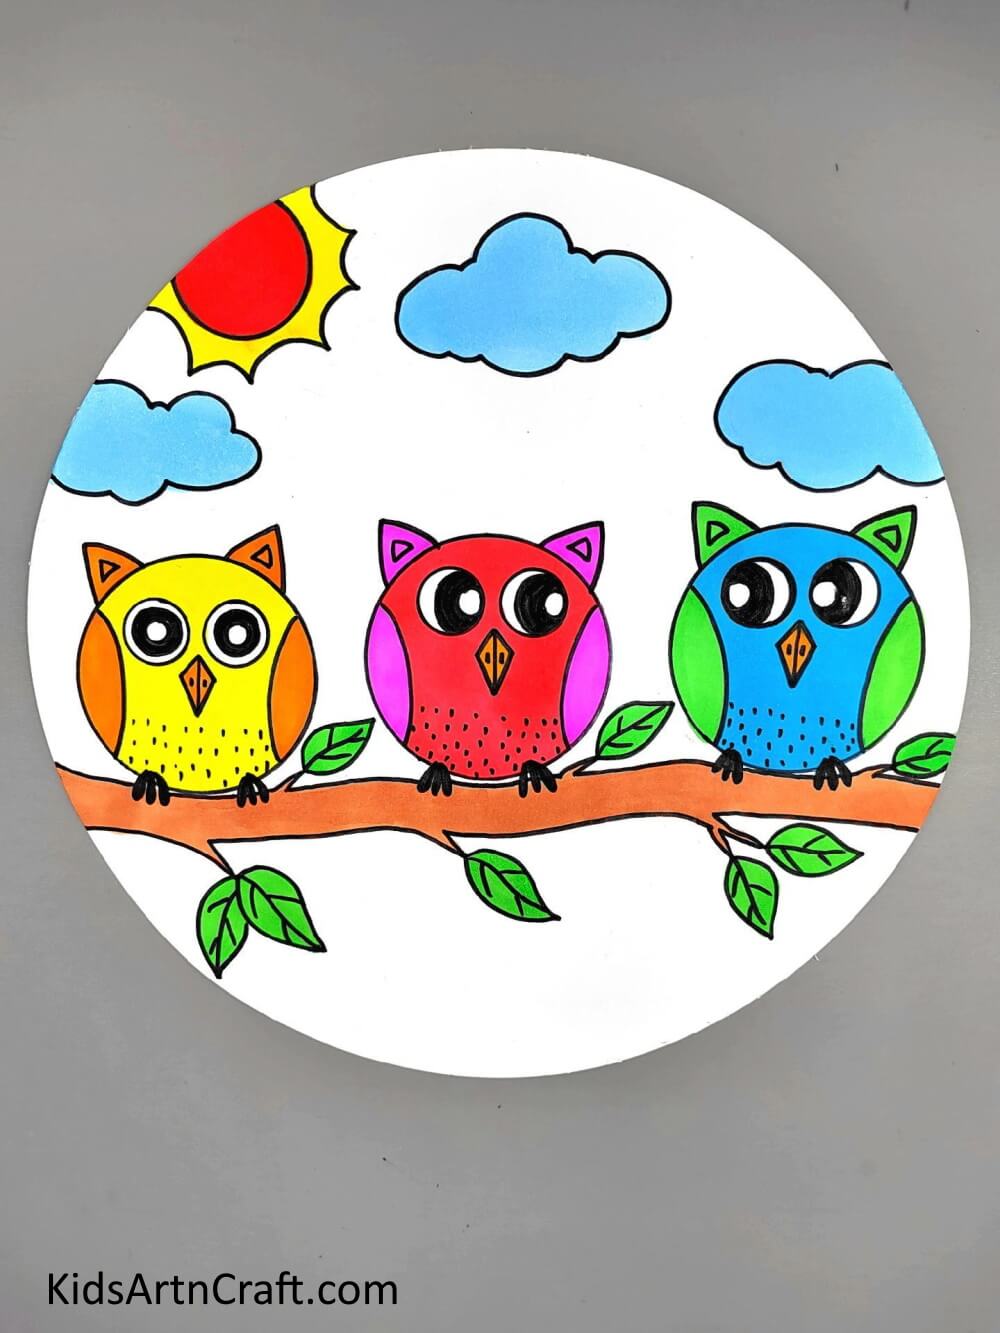 This Is The Final Look Of Our Cute Owls Craft! - Guidelines on depicting a set of owls in a simple way for children. 